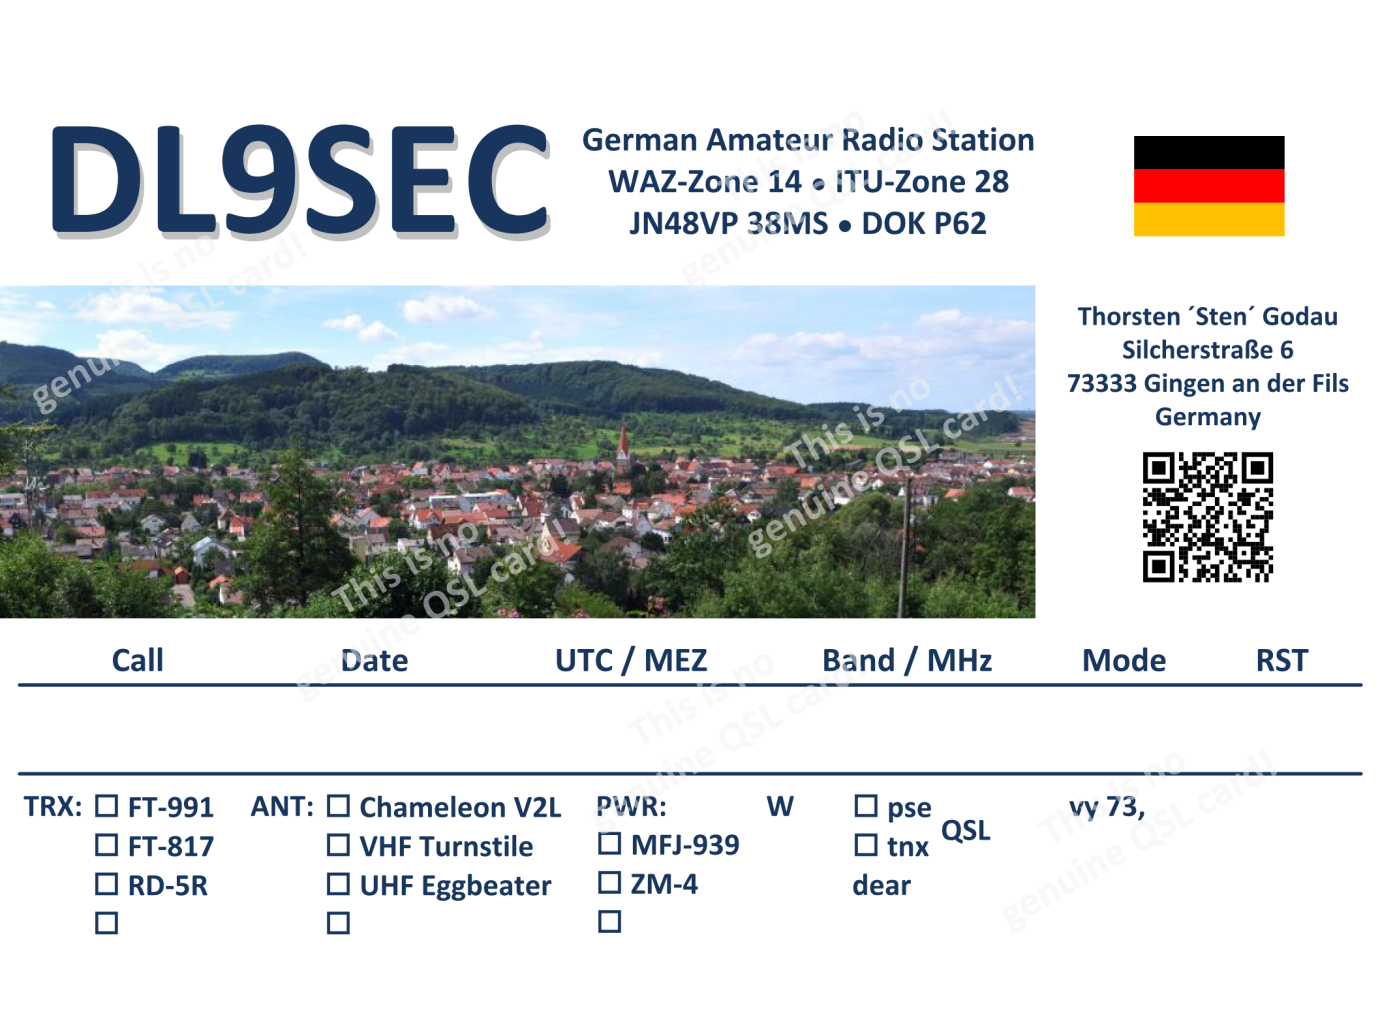 My current QSL card